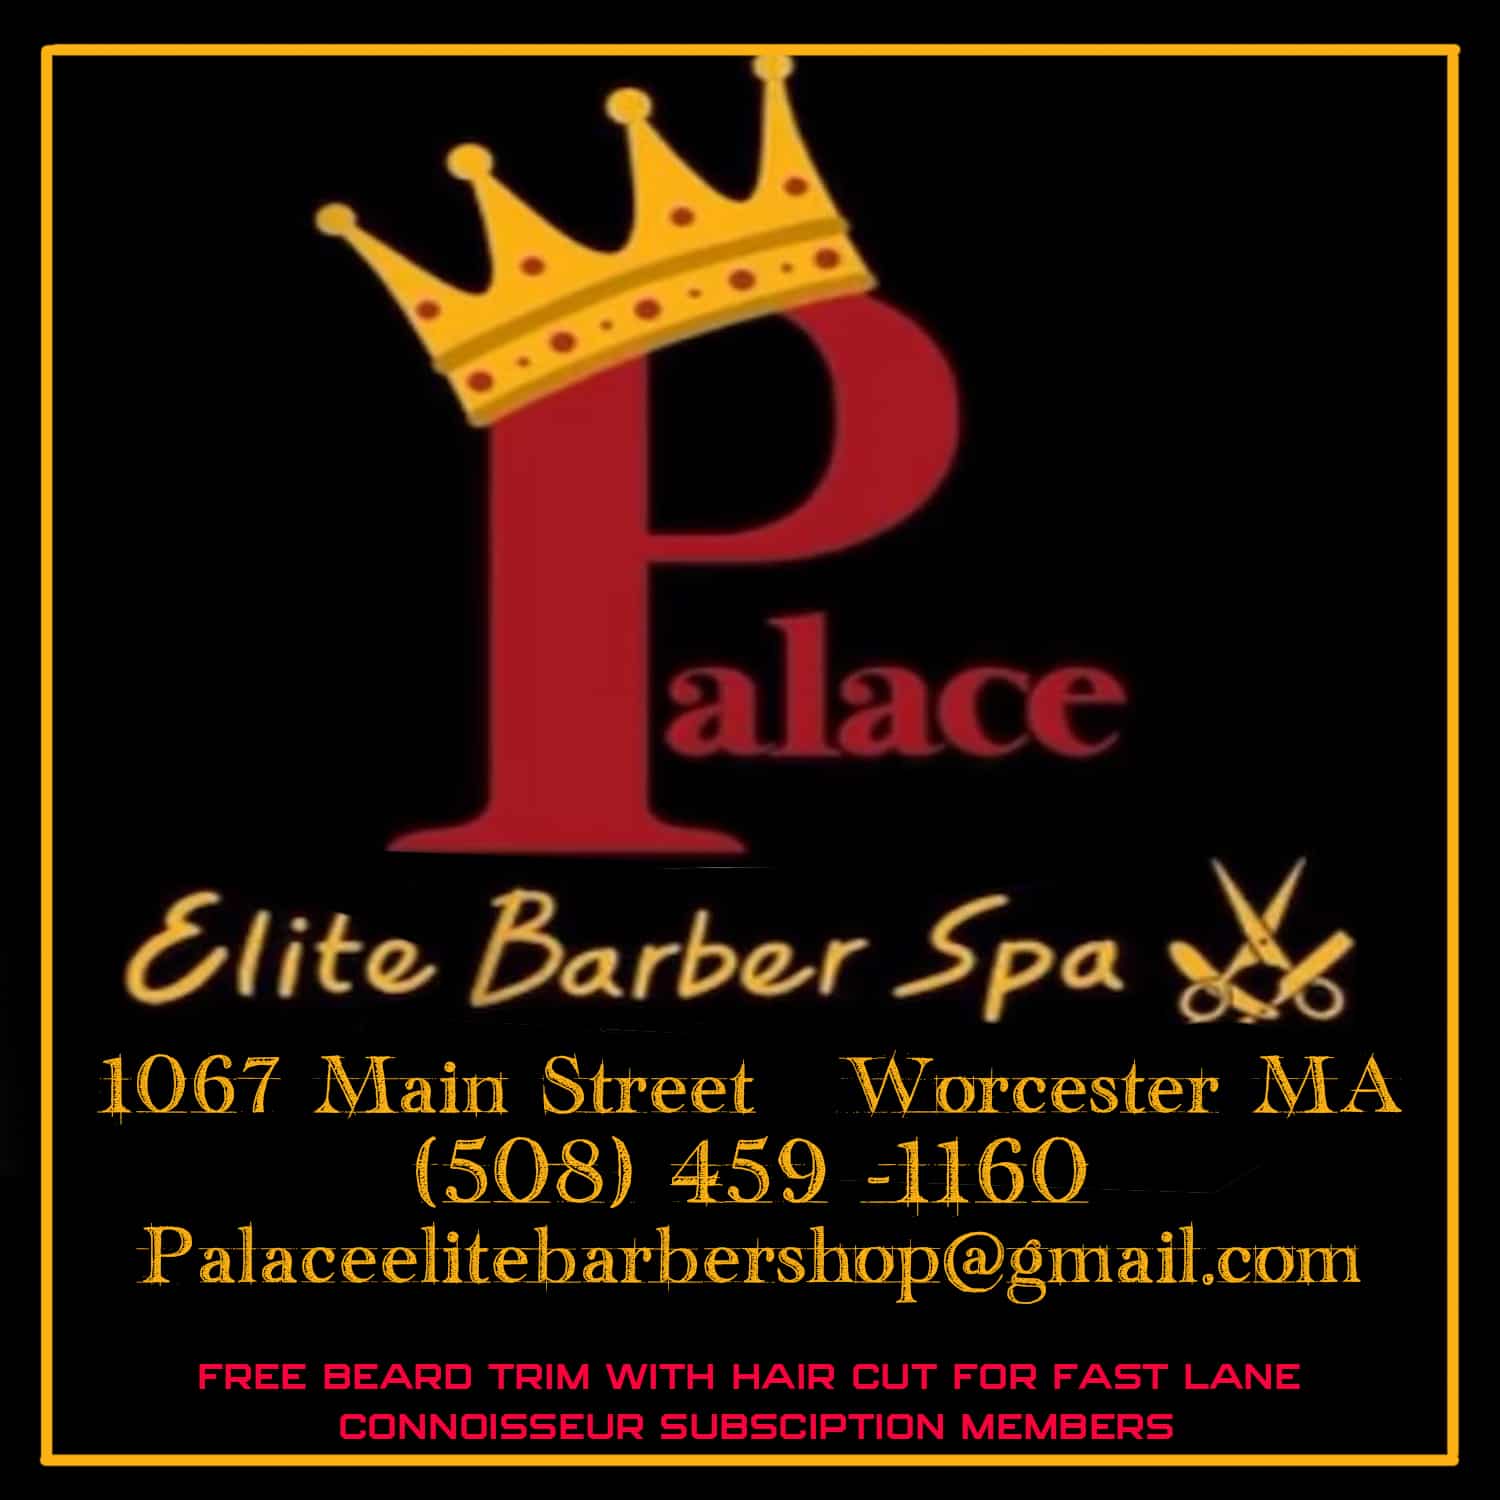 Delivered cannabis home delivery subscription program x Palace Elite Barber